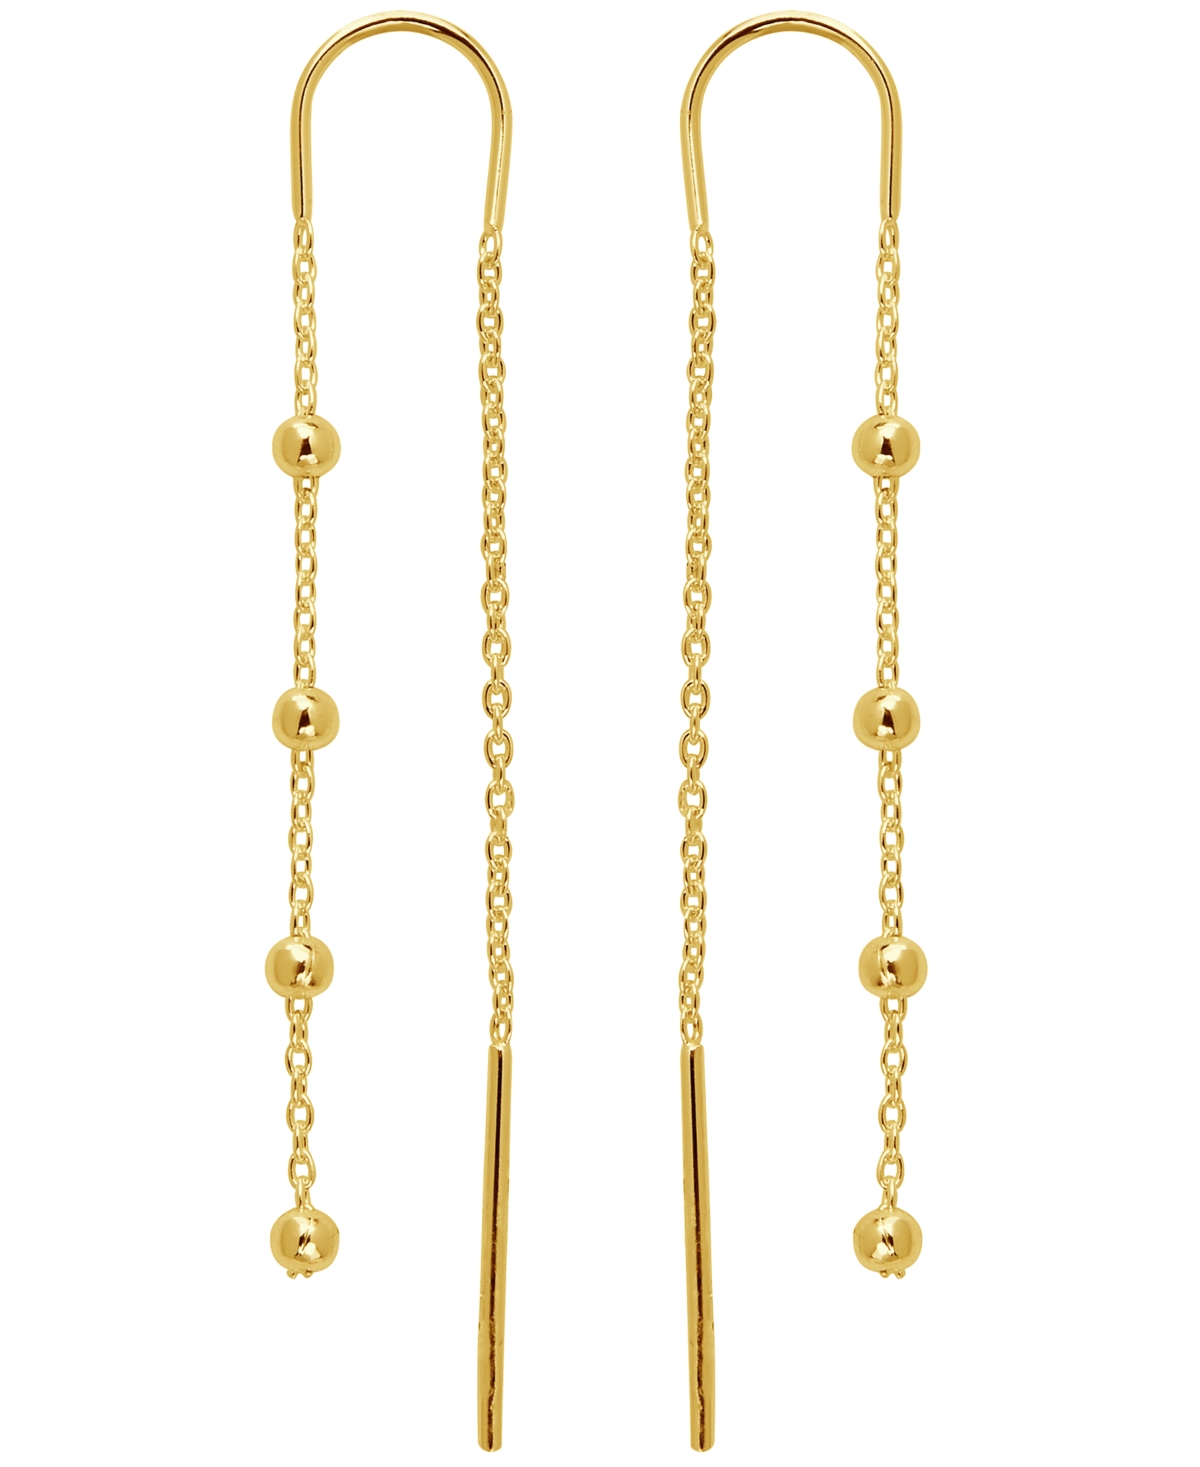 Giani Bernini Polished Ball Chain Threader Drop Earrings In 18k Gold-plated Sterling Silver, Created For Macy's (a In Gold Over Silver